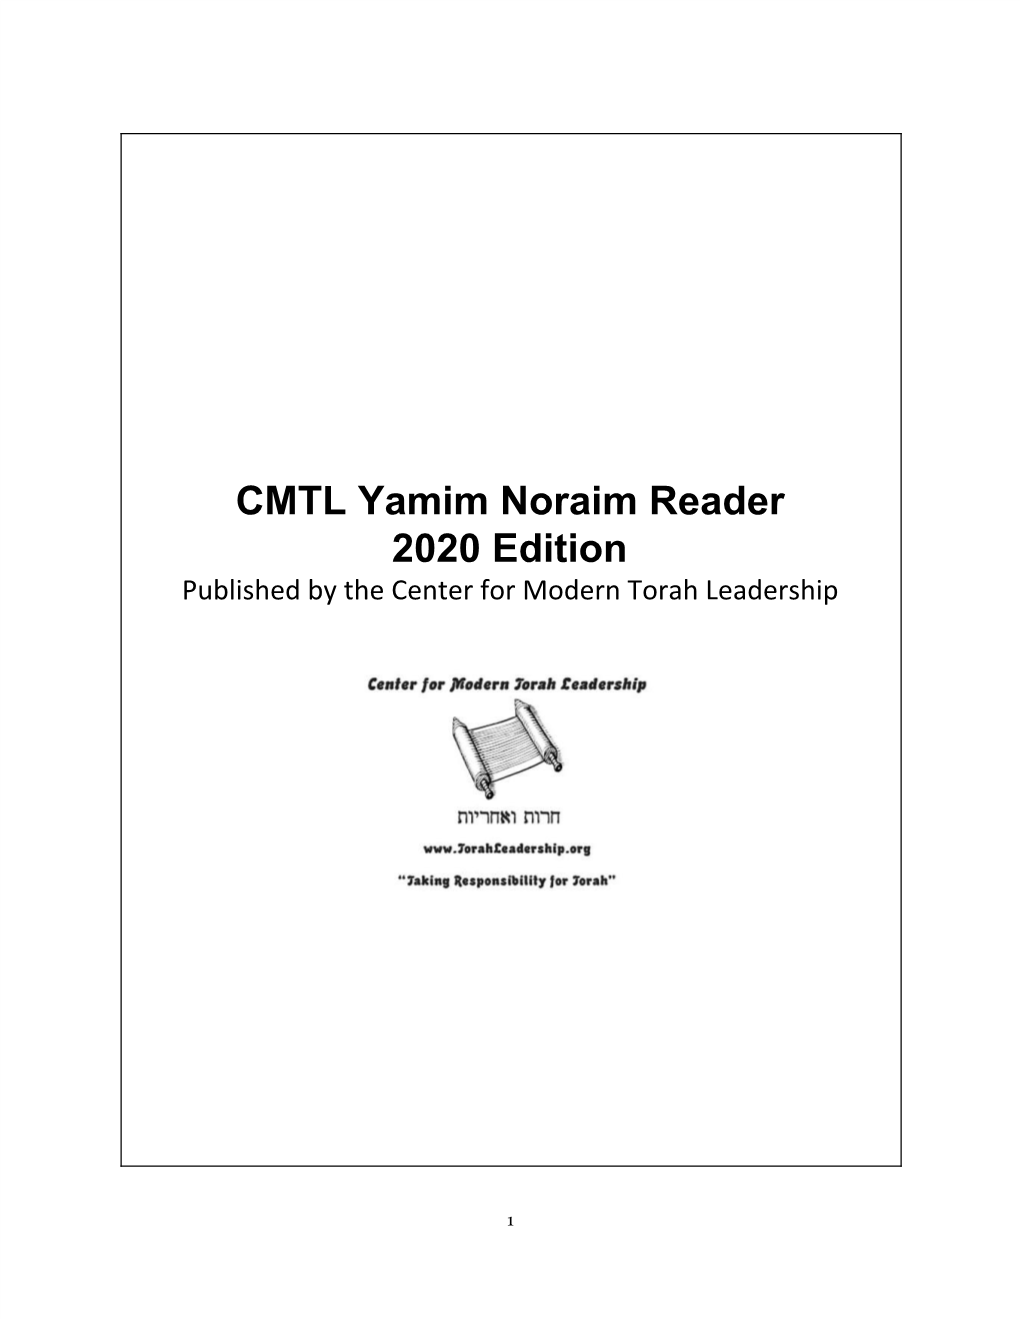 CMTL Yamim Noraim Reader 2020 Edition Published by the Center for Modern Torah Leadership